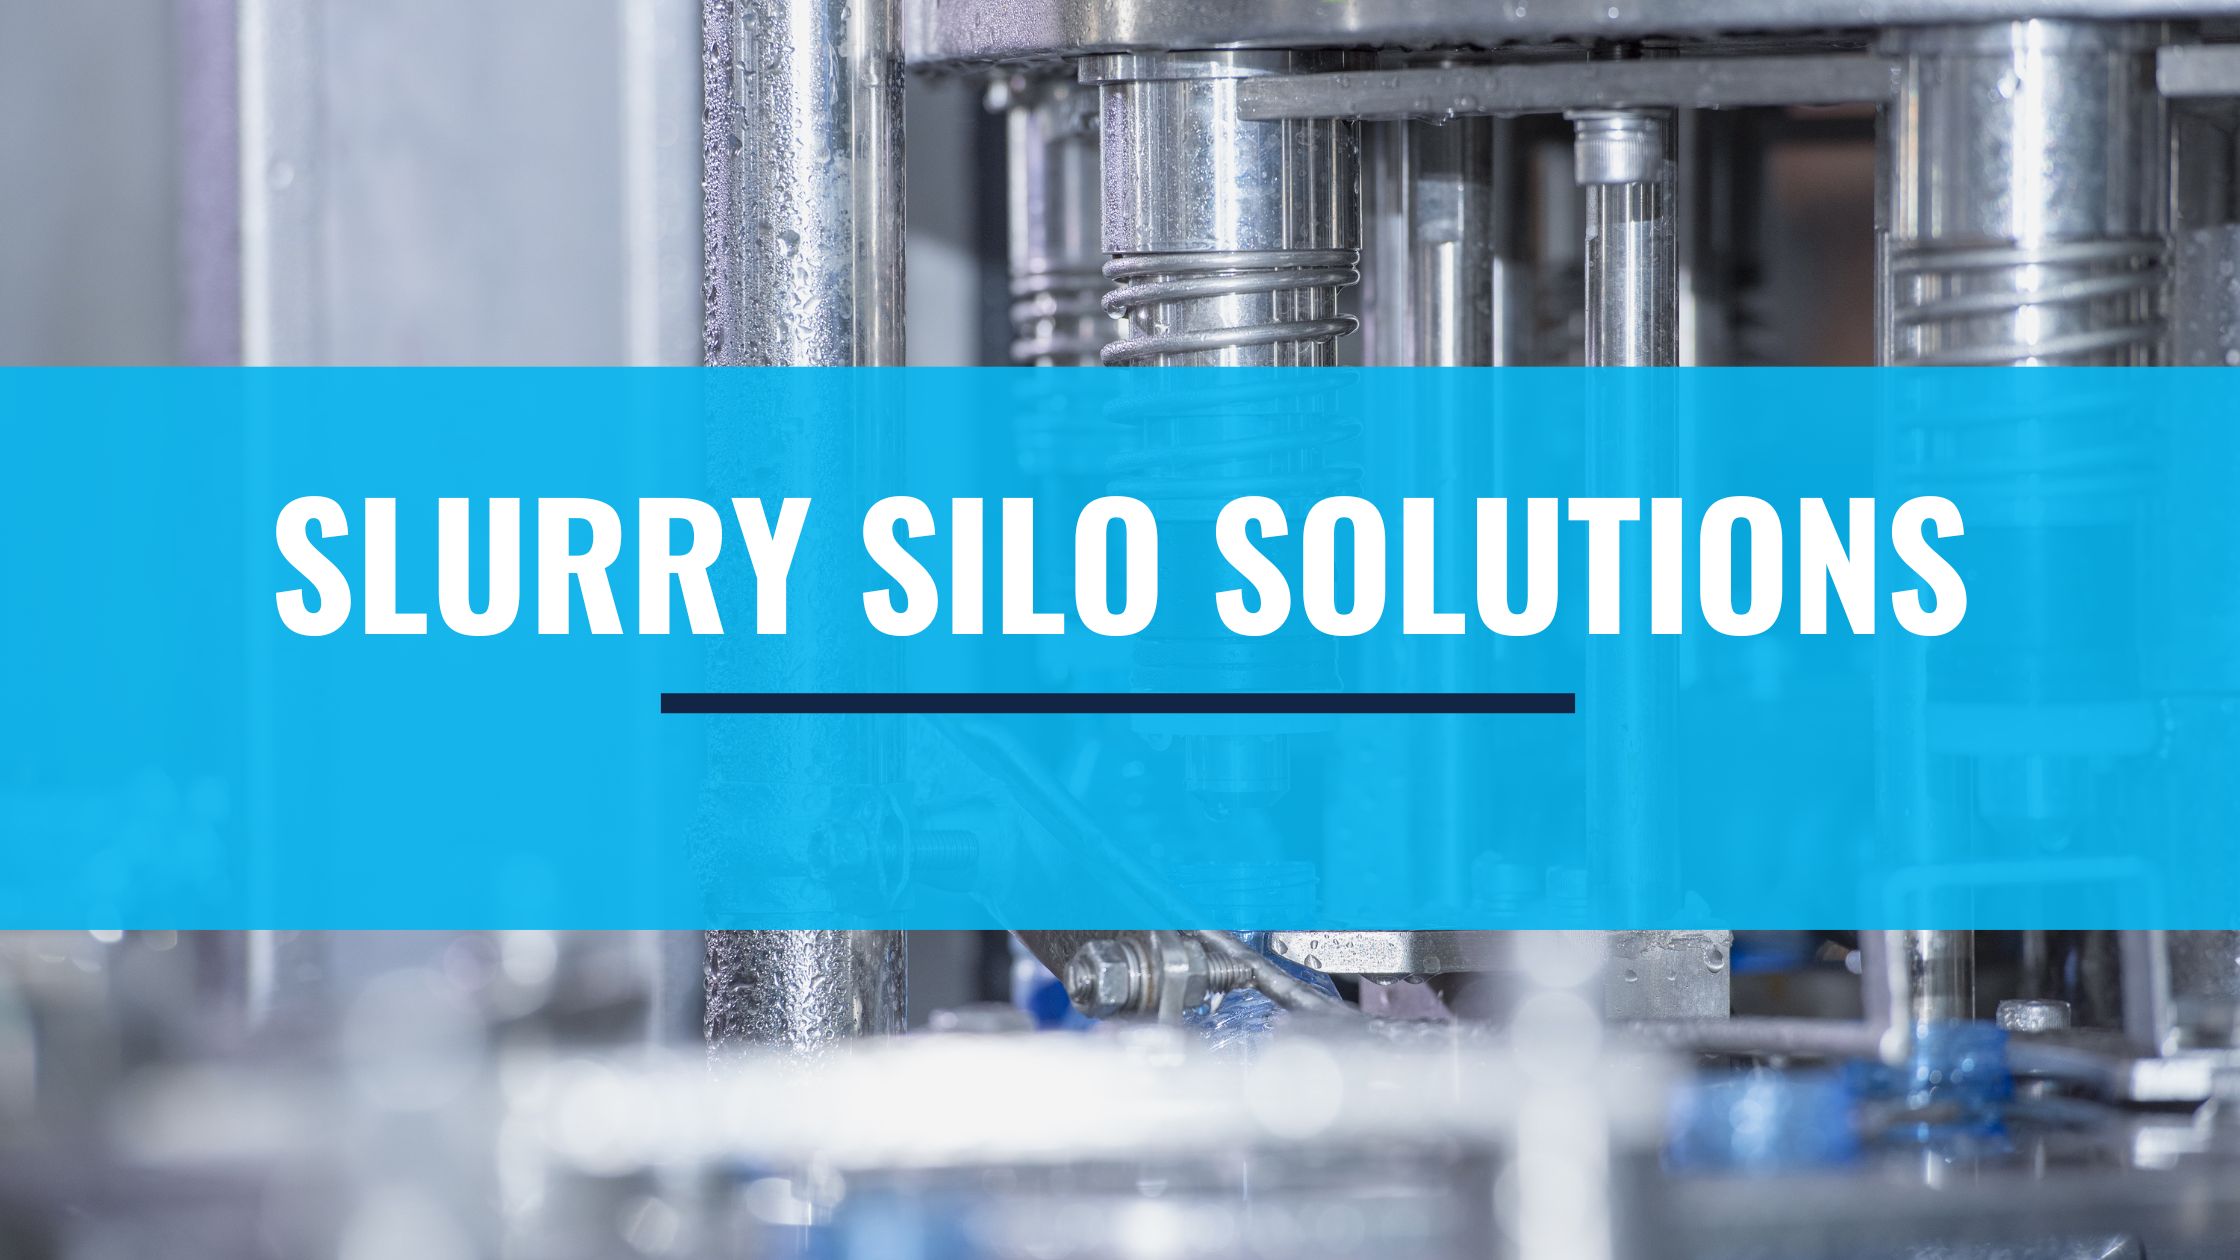 Featured image for “Product Spotlight: Slurry Silo”